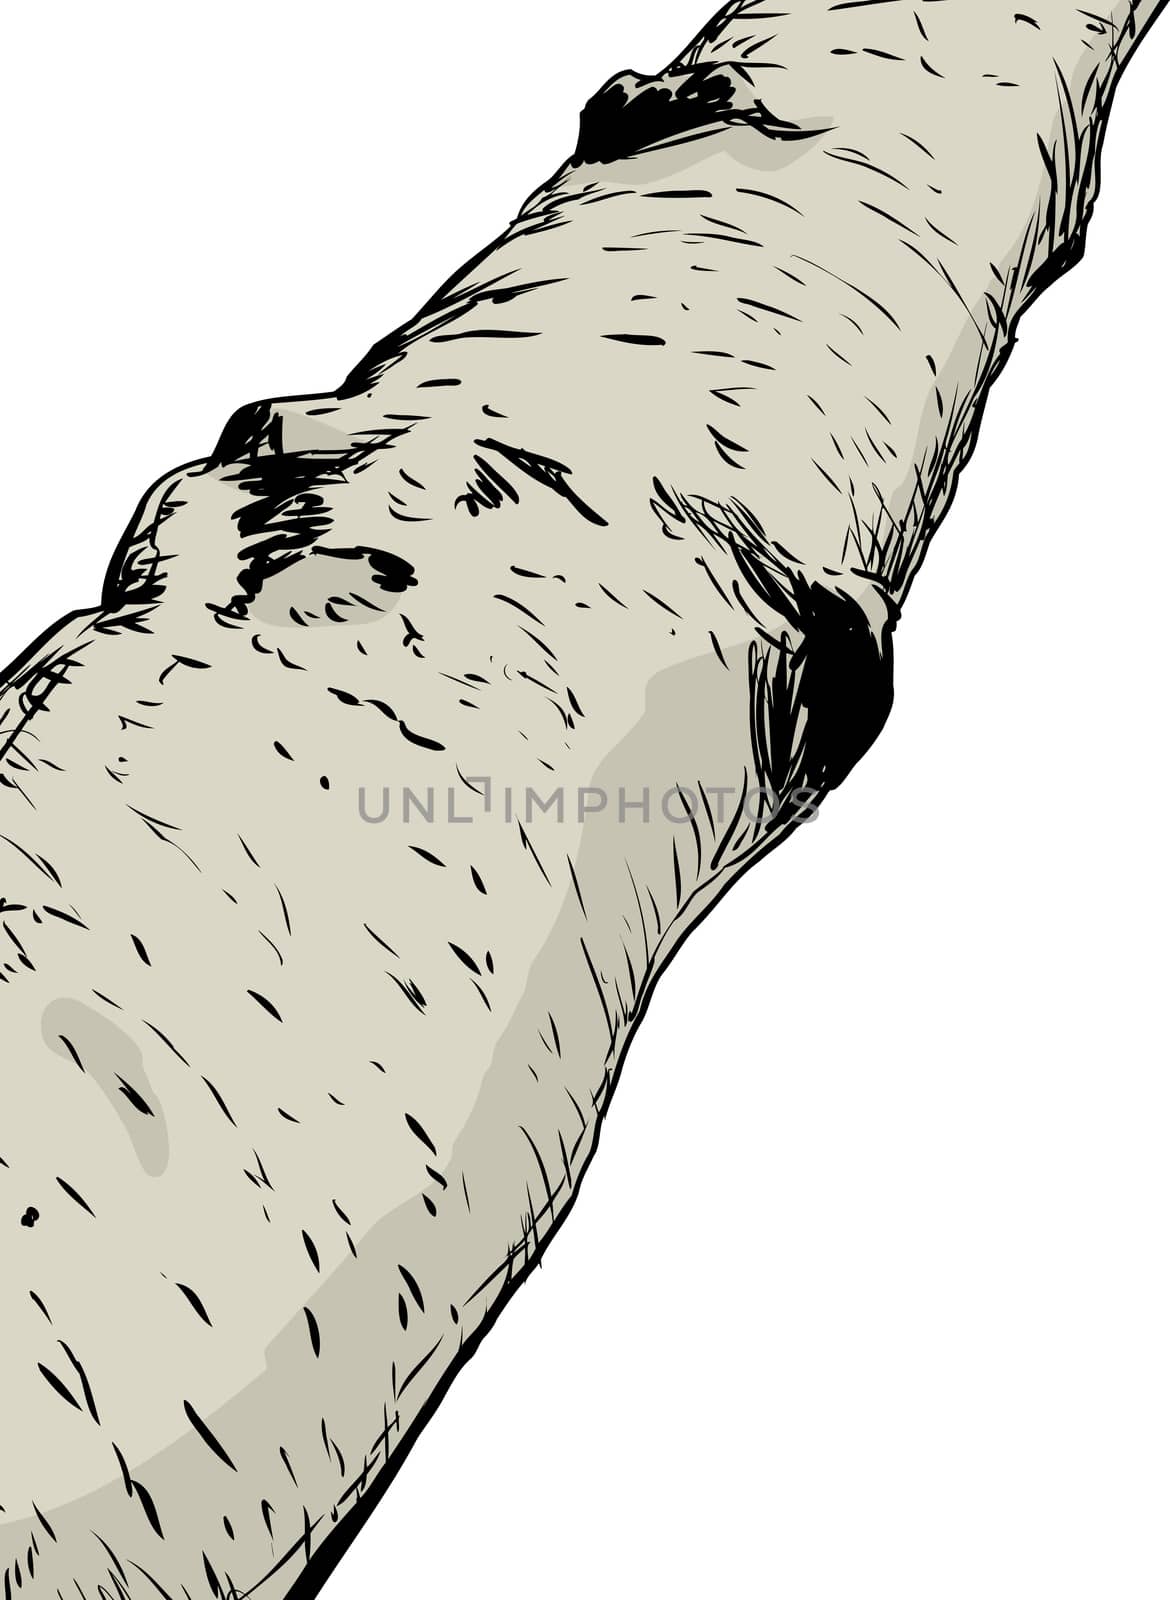 Close up illustration on part of birch tree trunk over white